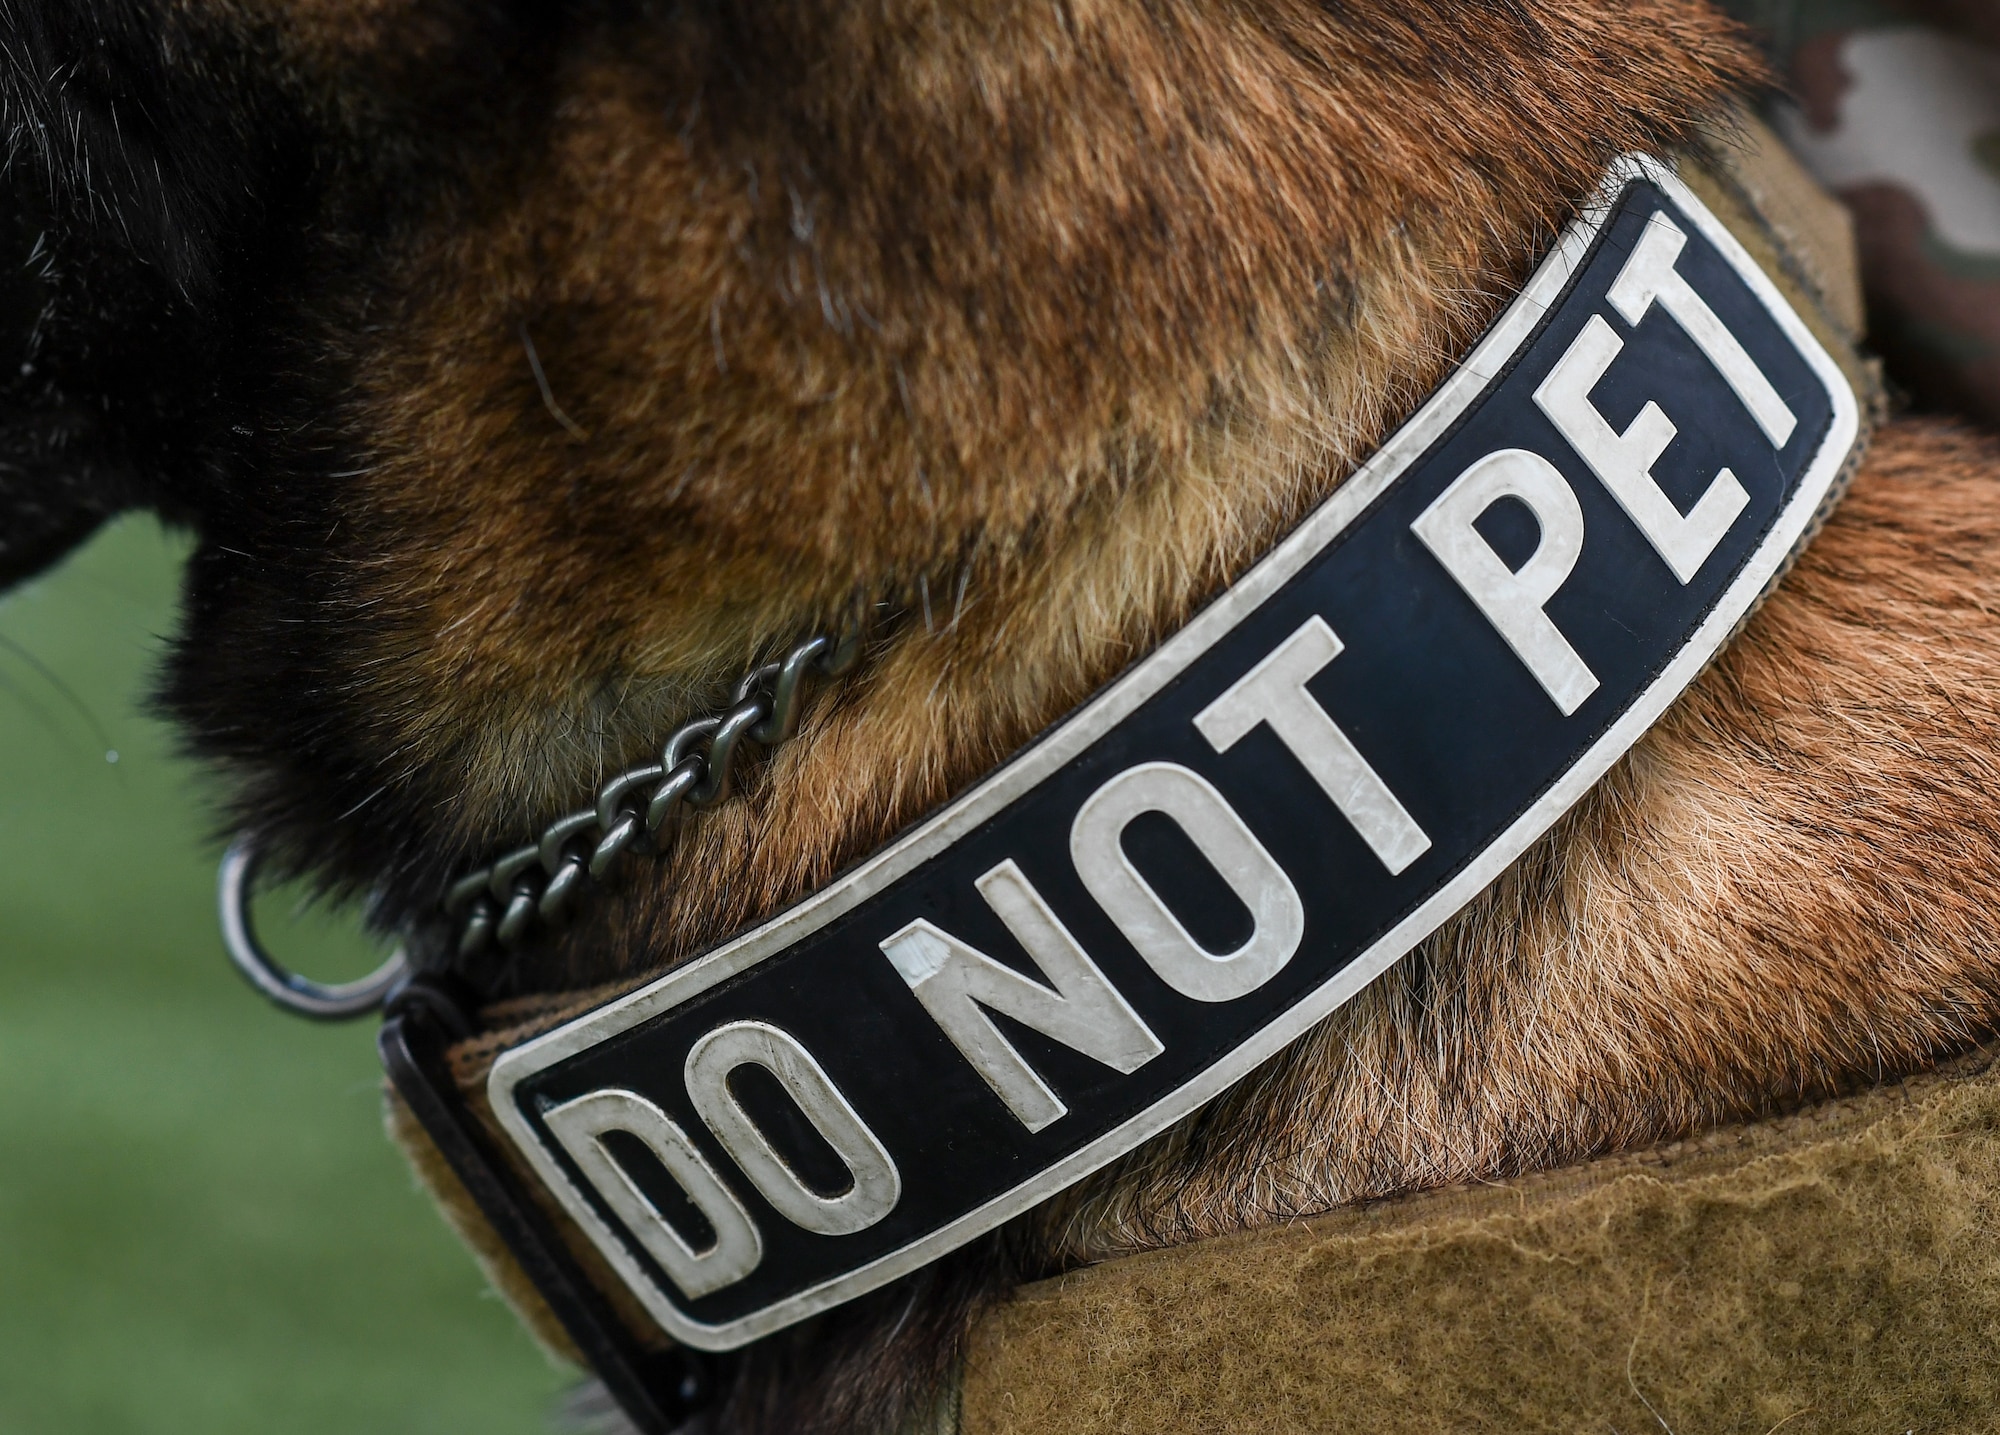 Airmen, canines work paw-in-hand